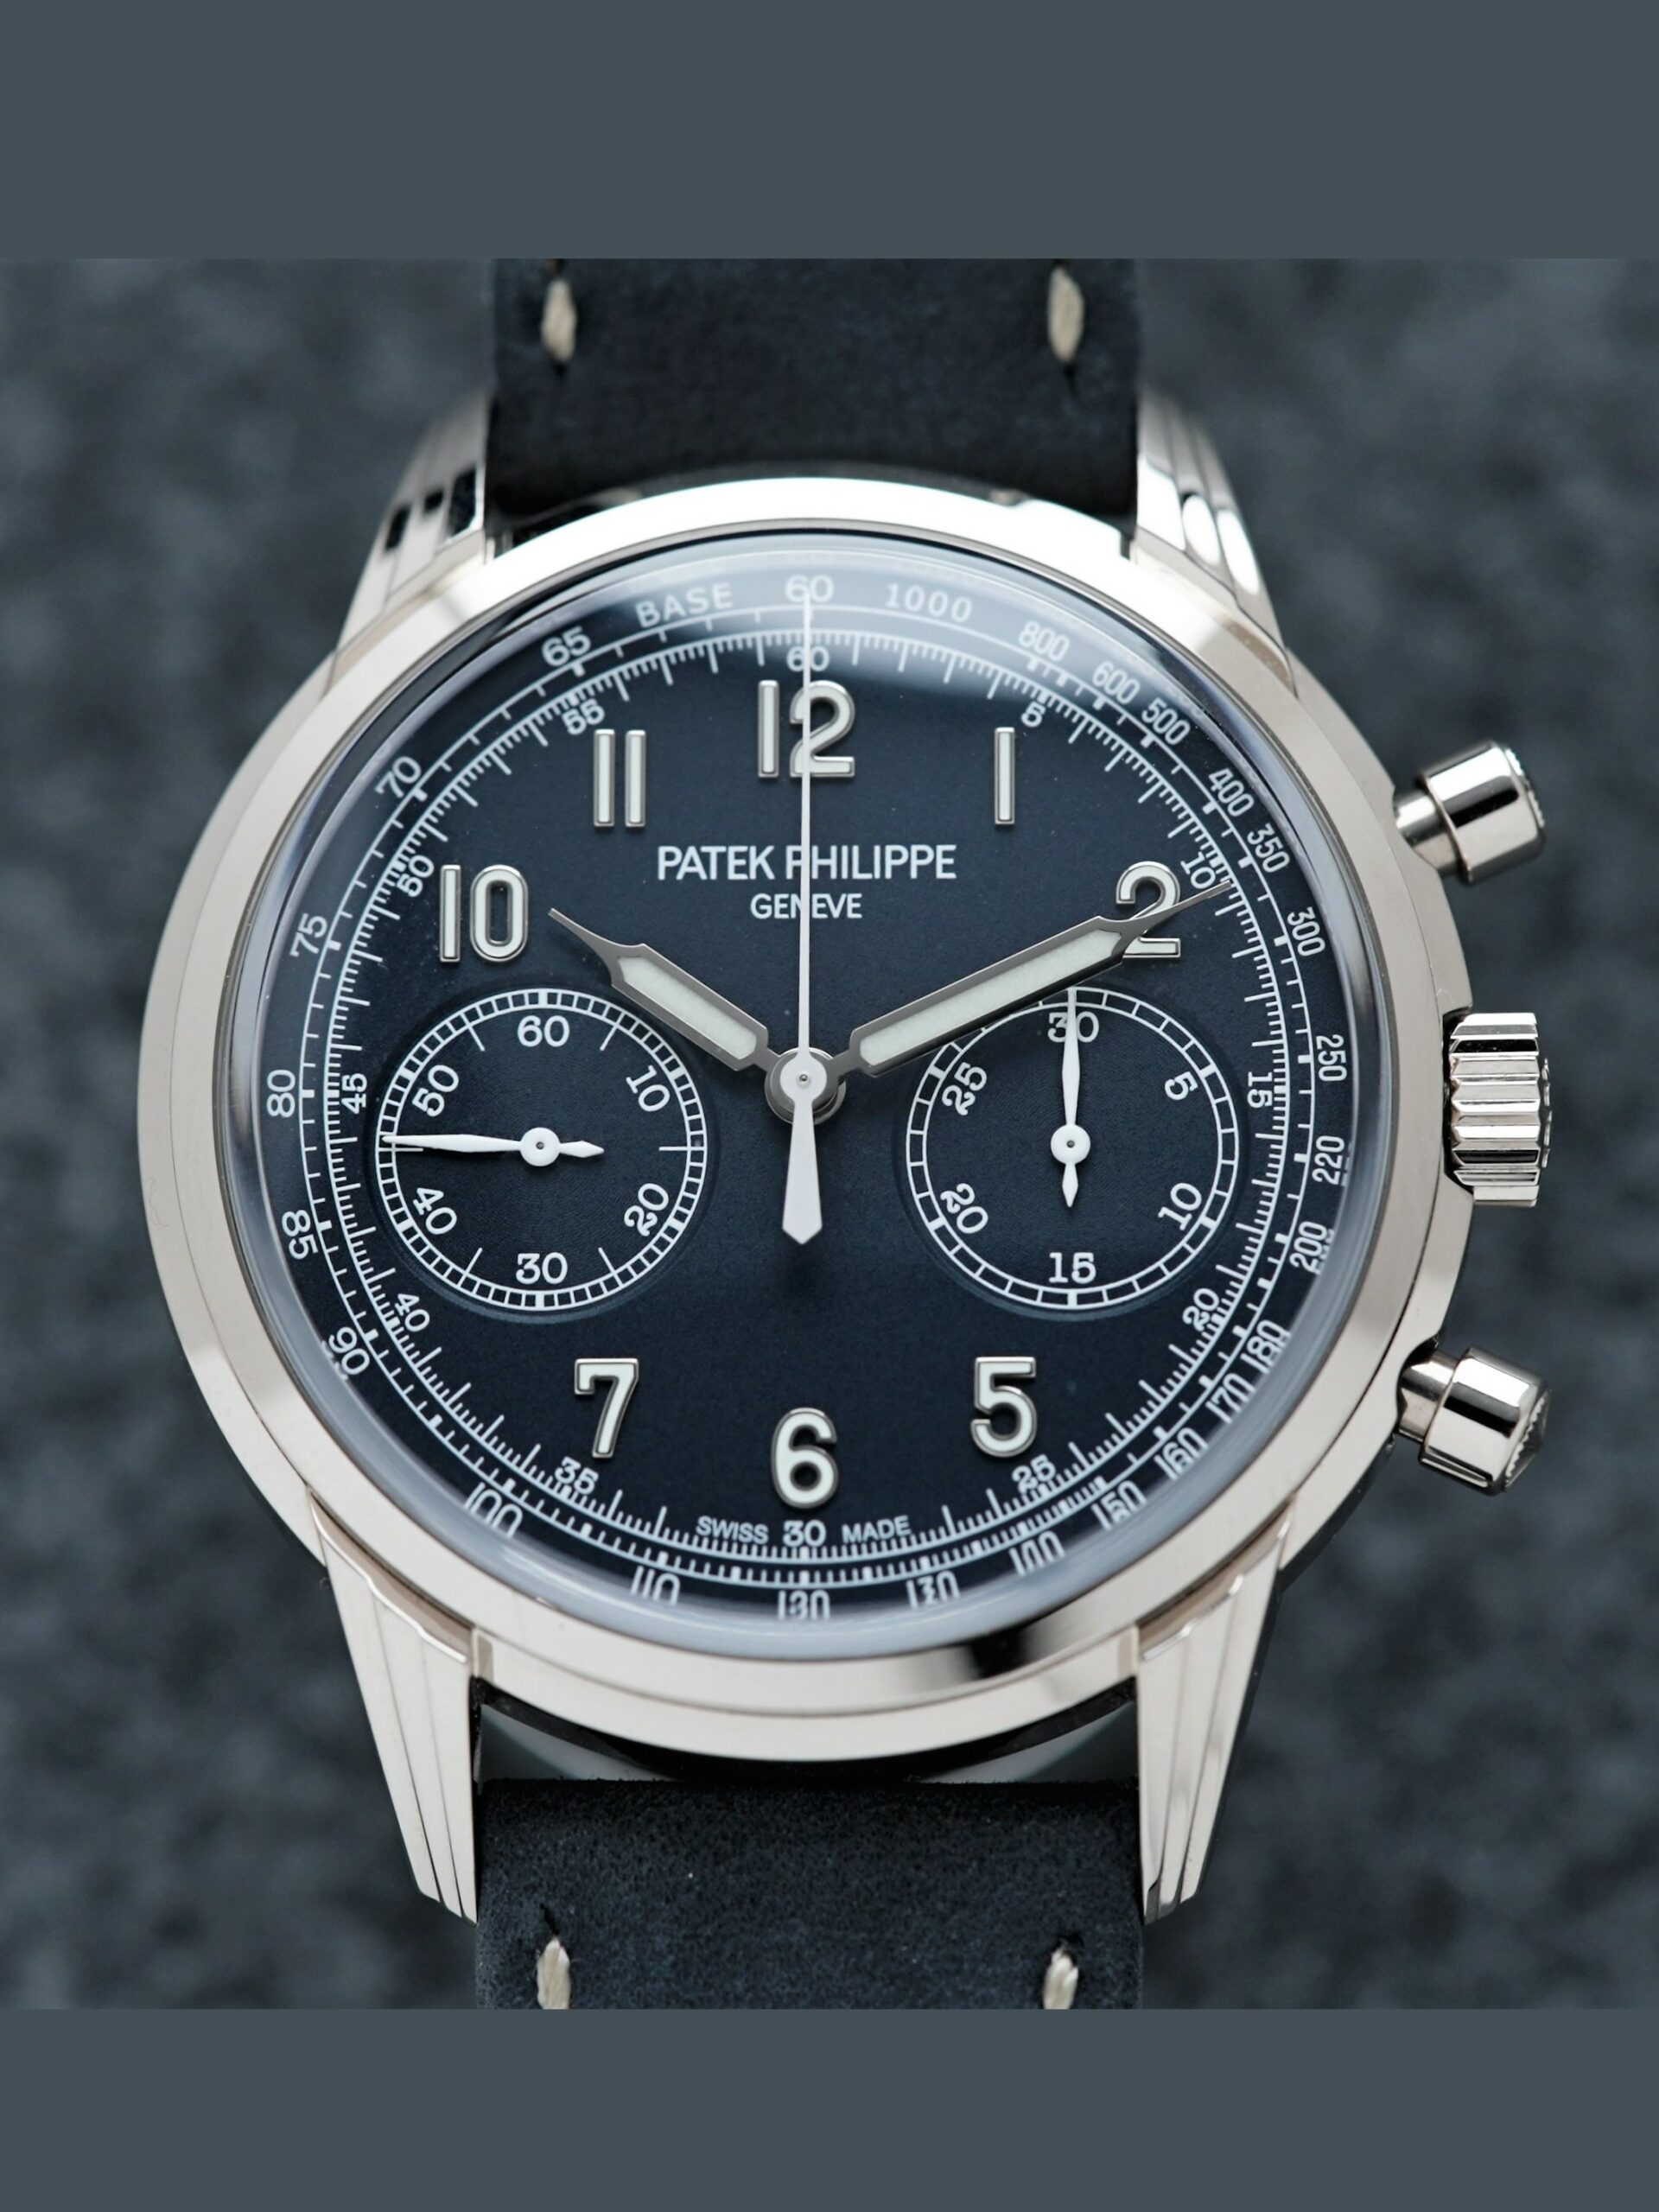 Patek Philippe Chronograph 5172 Complications Chronograph Recently Serviced Seal 5172G-001 White Gold watch featured under white lighting.